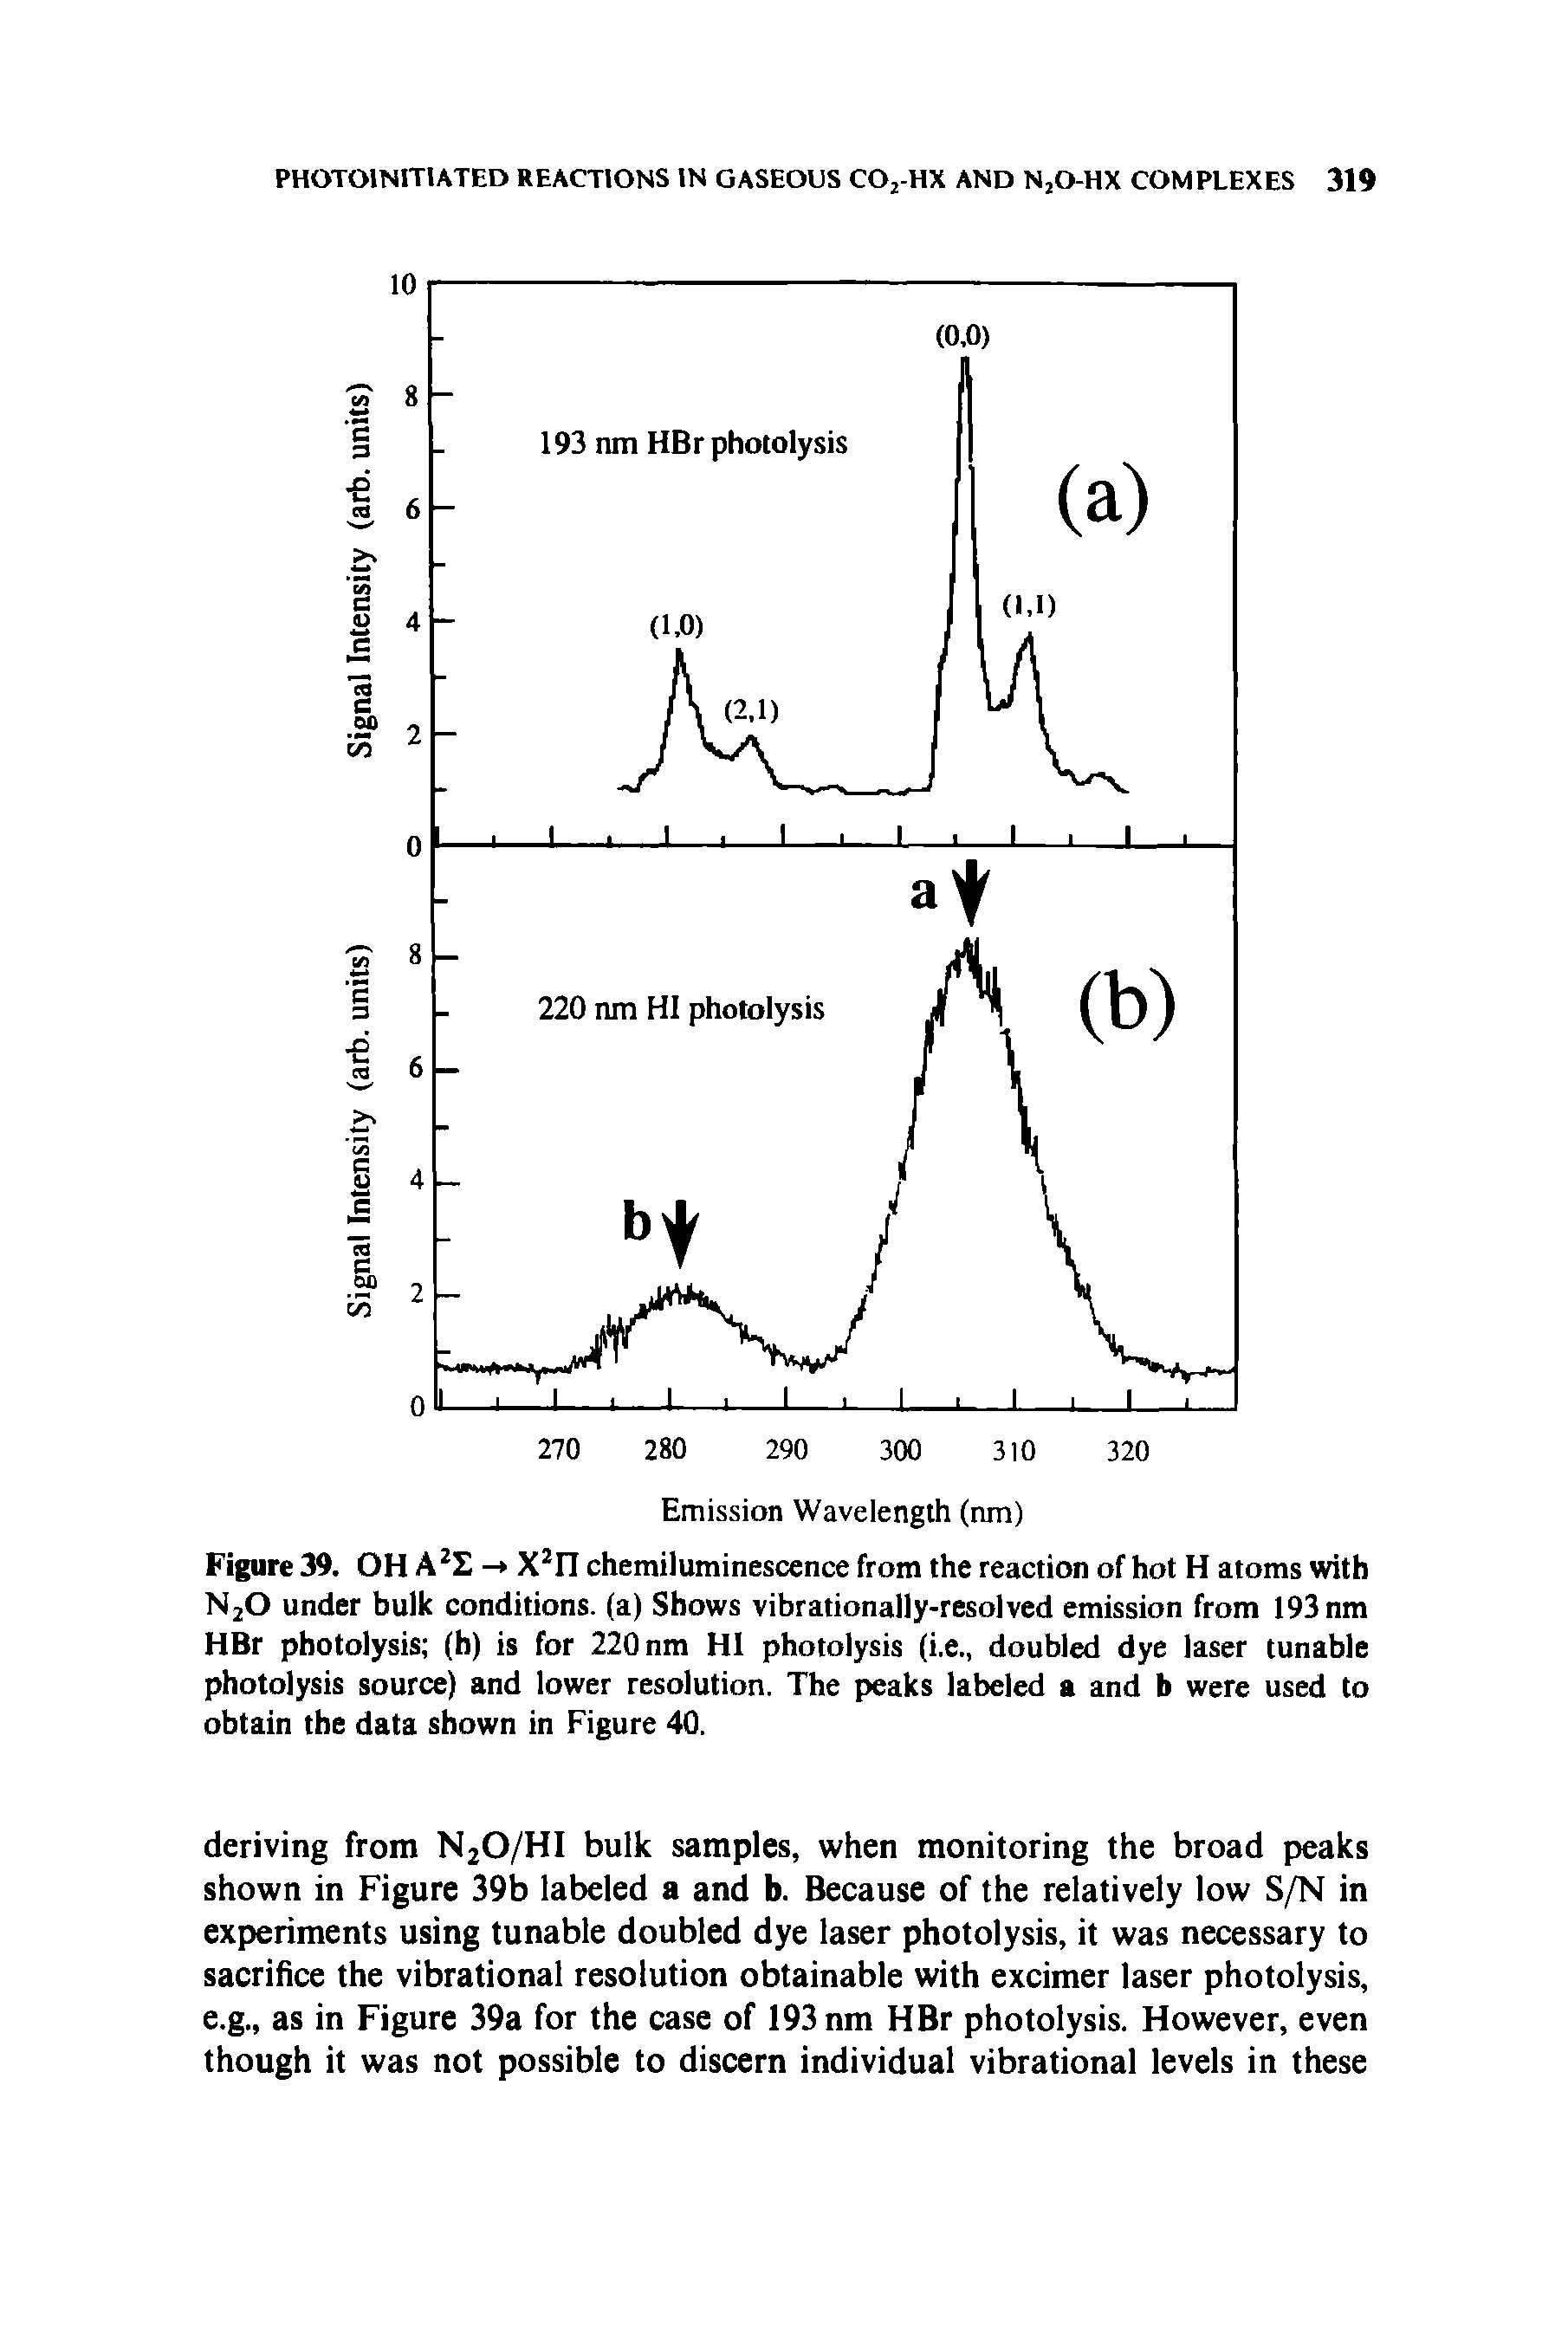 Figure 39. OH - X II chemiluminescence from the reaction of hot H atoms with NjO under bulk conditions, (a) Shows vibrationally-resolved emission from 193 nm HBr photolysis (h) is for 220 nm HI photolysis (i.e., doubled dye laser tunable photolysis source) and lower resolution. The peaks labeled a and b were used to obtain the data shown in Figure 40.